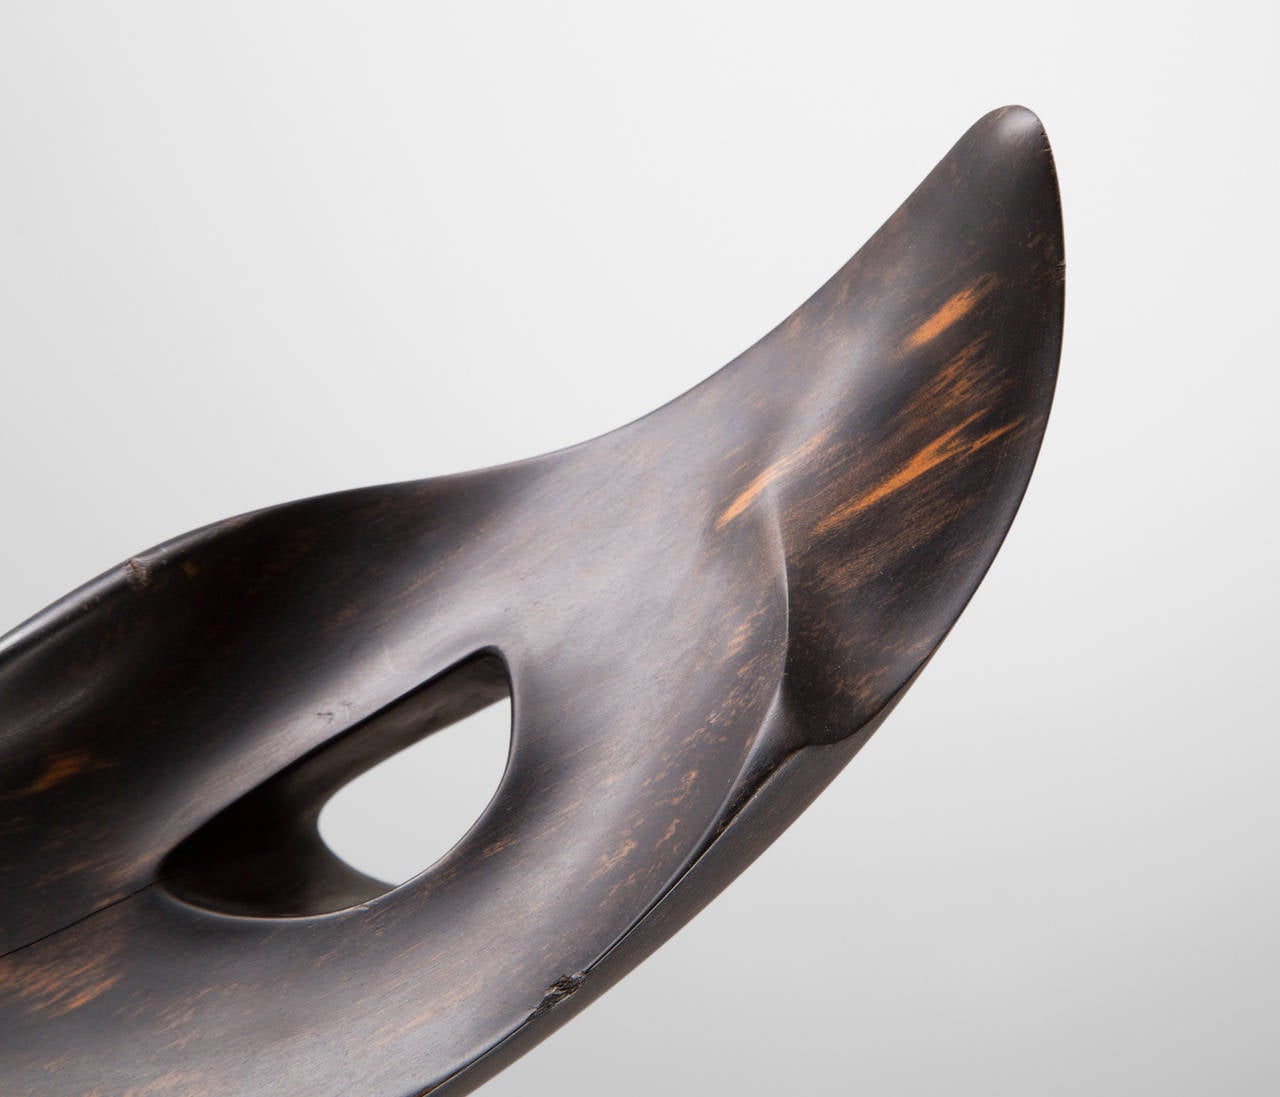 French Signed Alexandre Noll 'Flame' Sculpture in Ebony